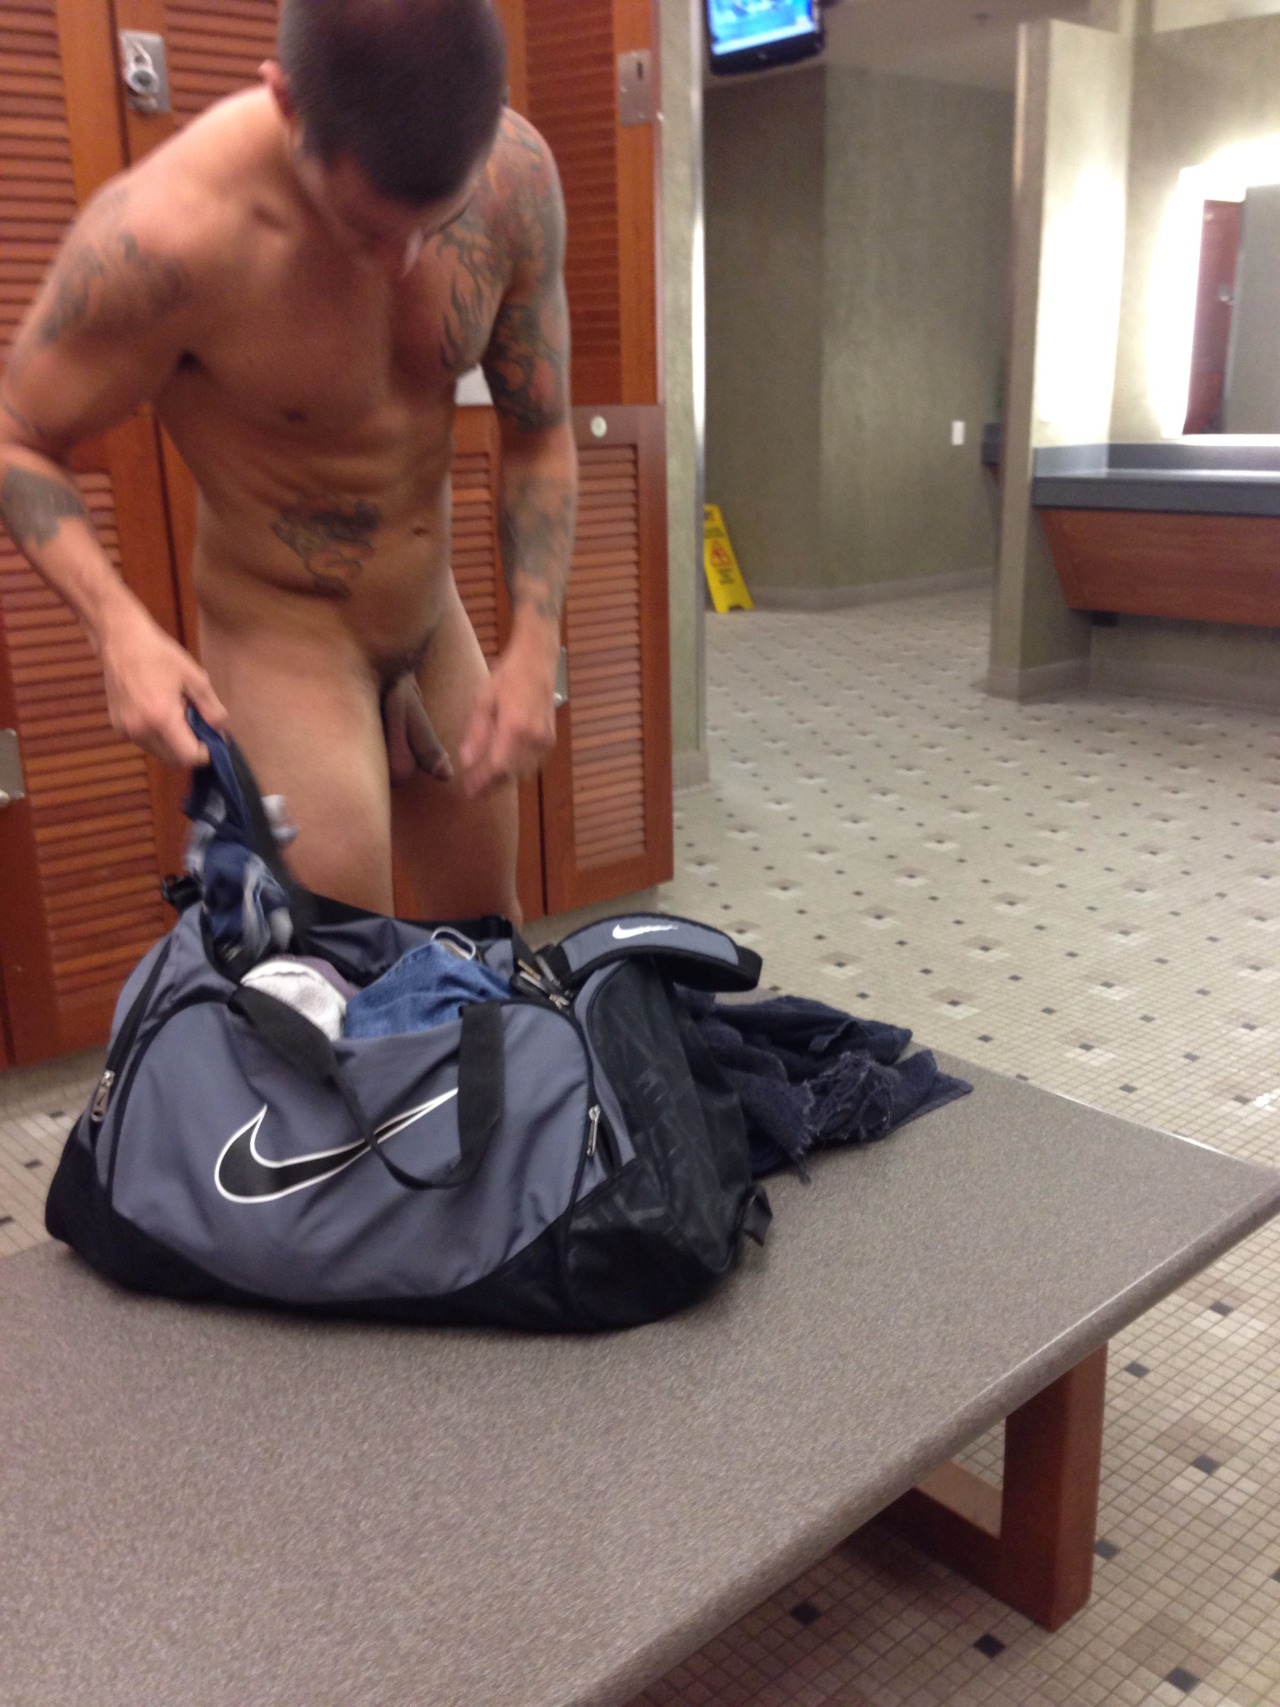 Spycam in changing room